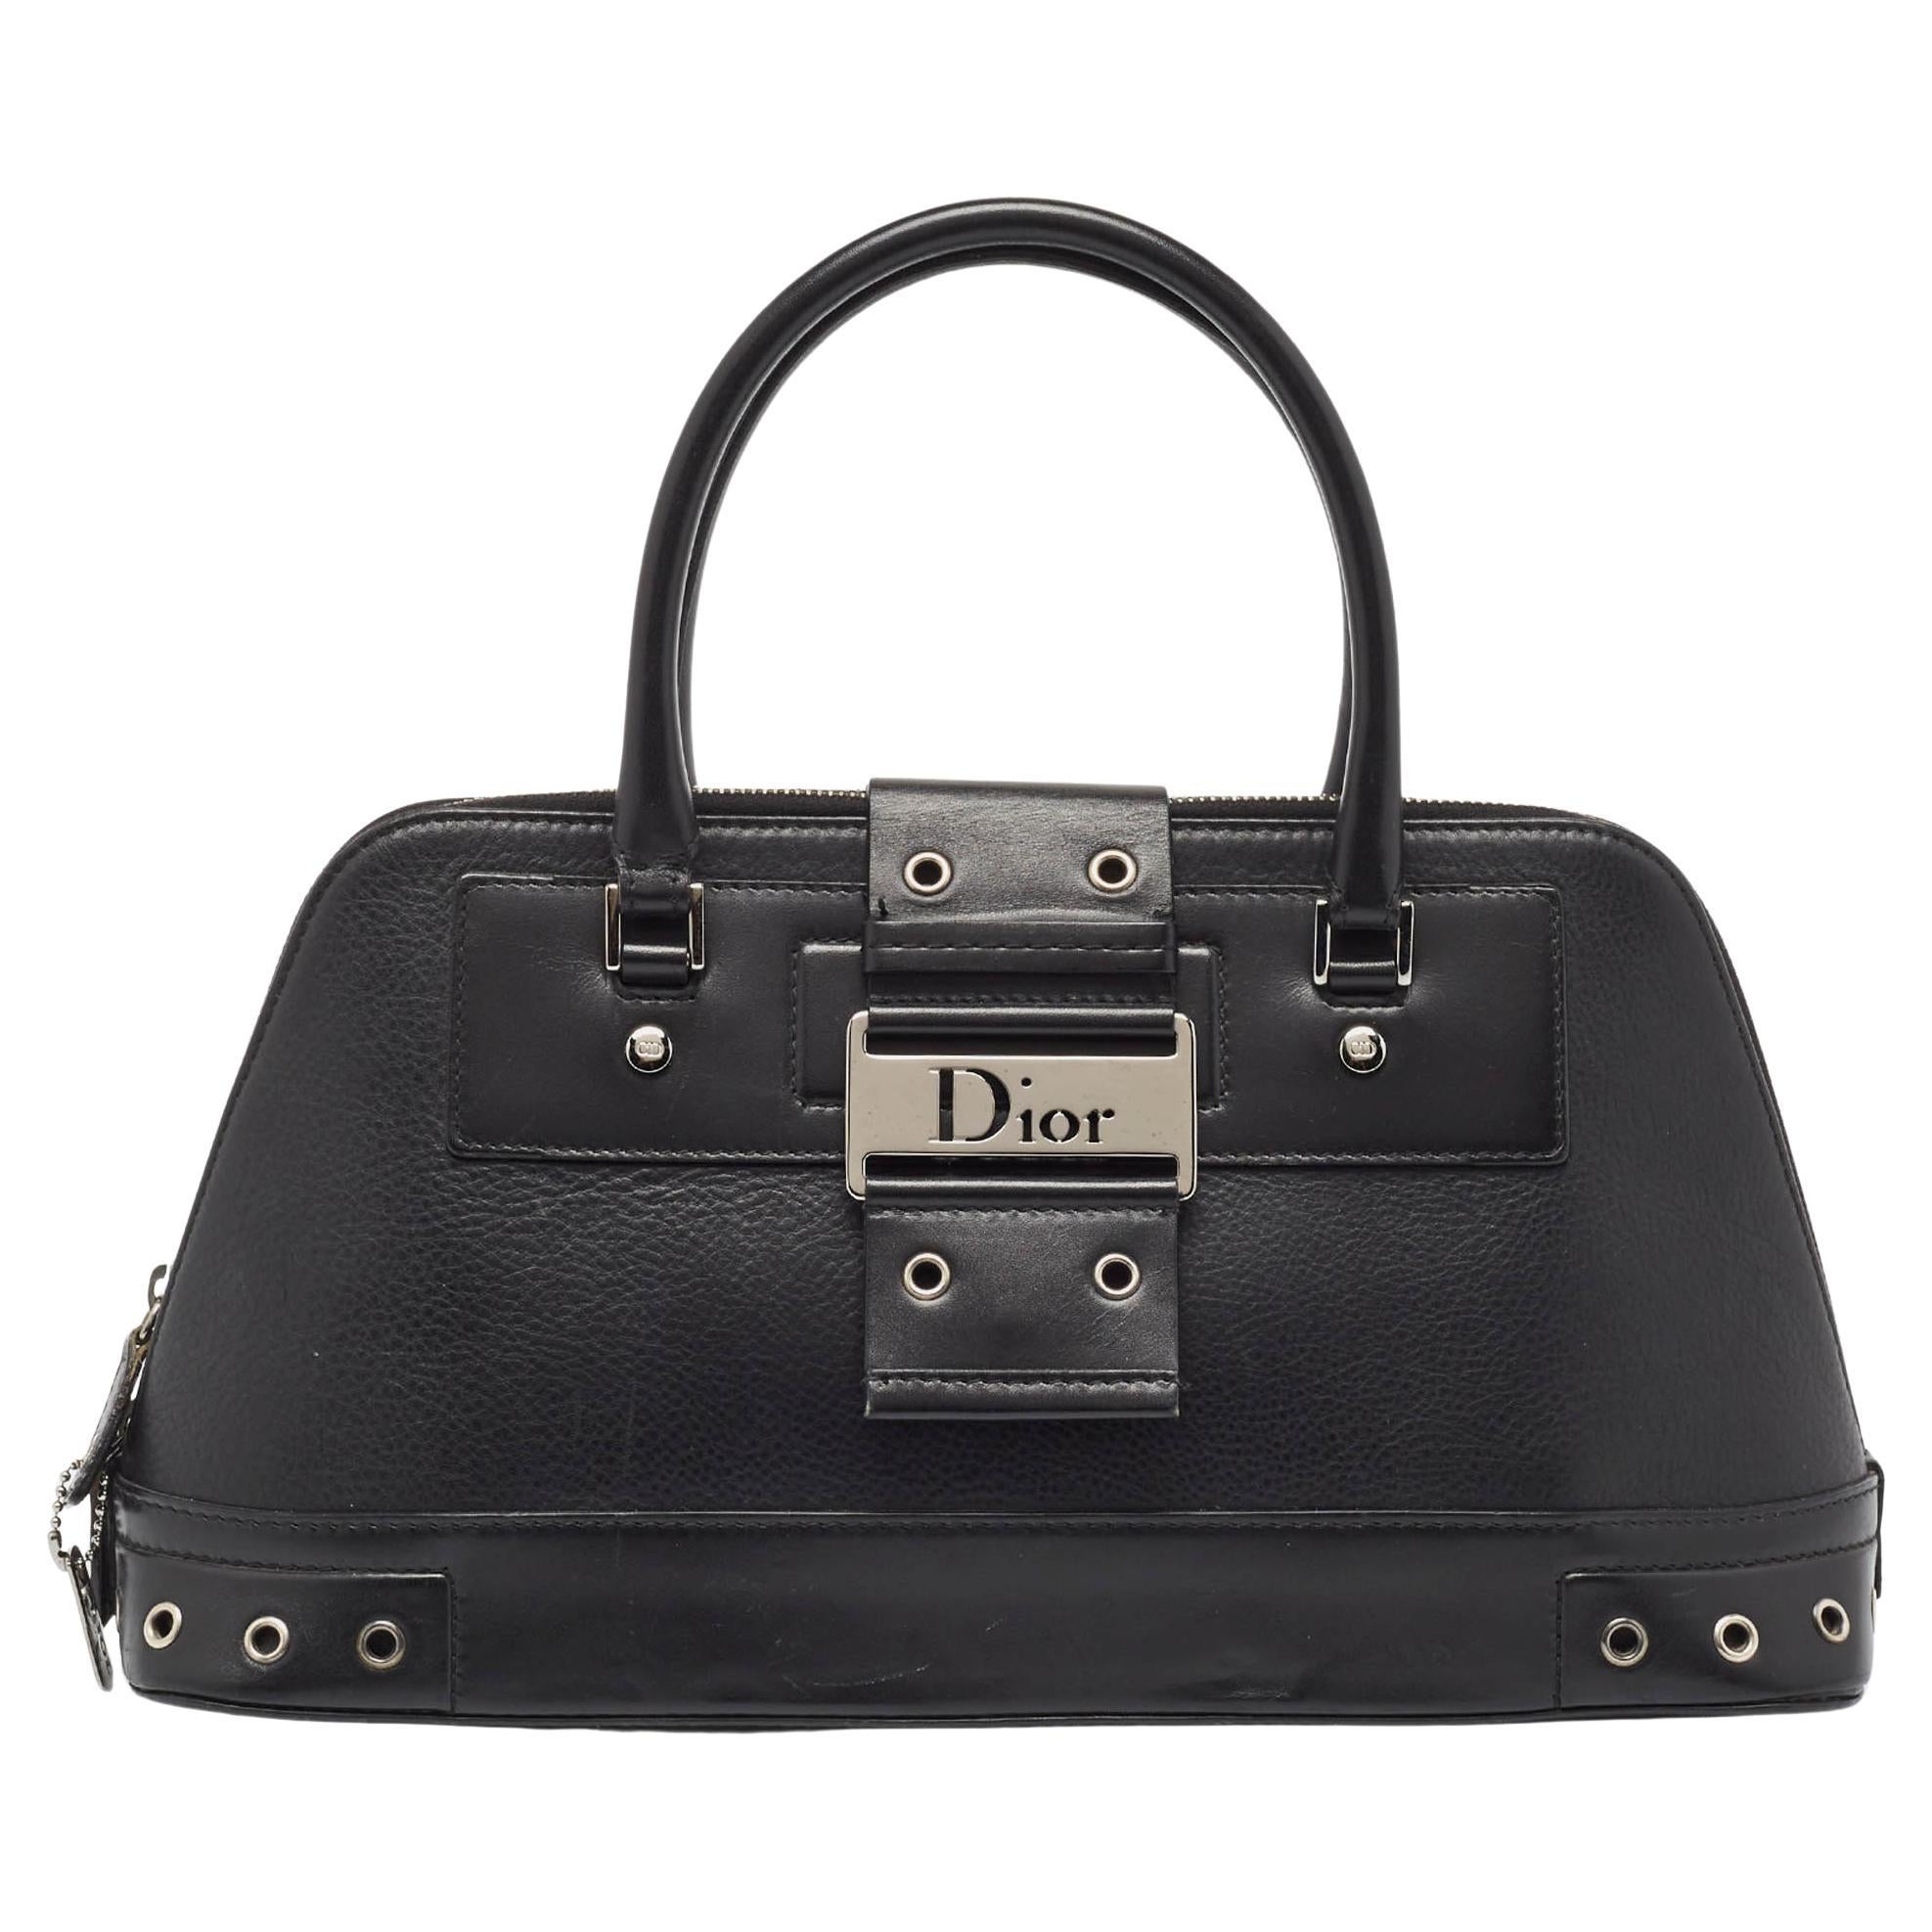 Dior Black Leather Street Chic Satchel For Sale